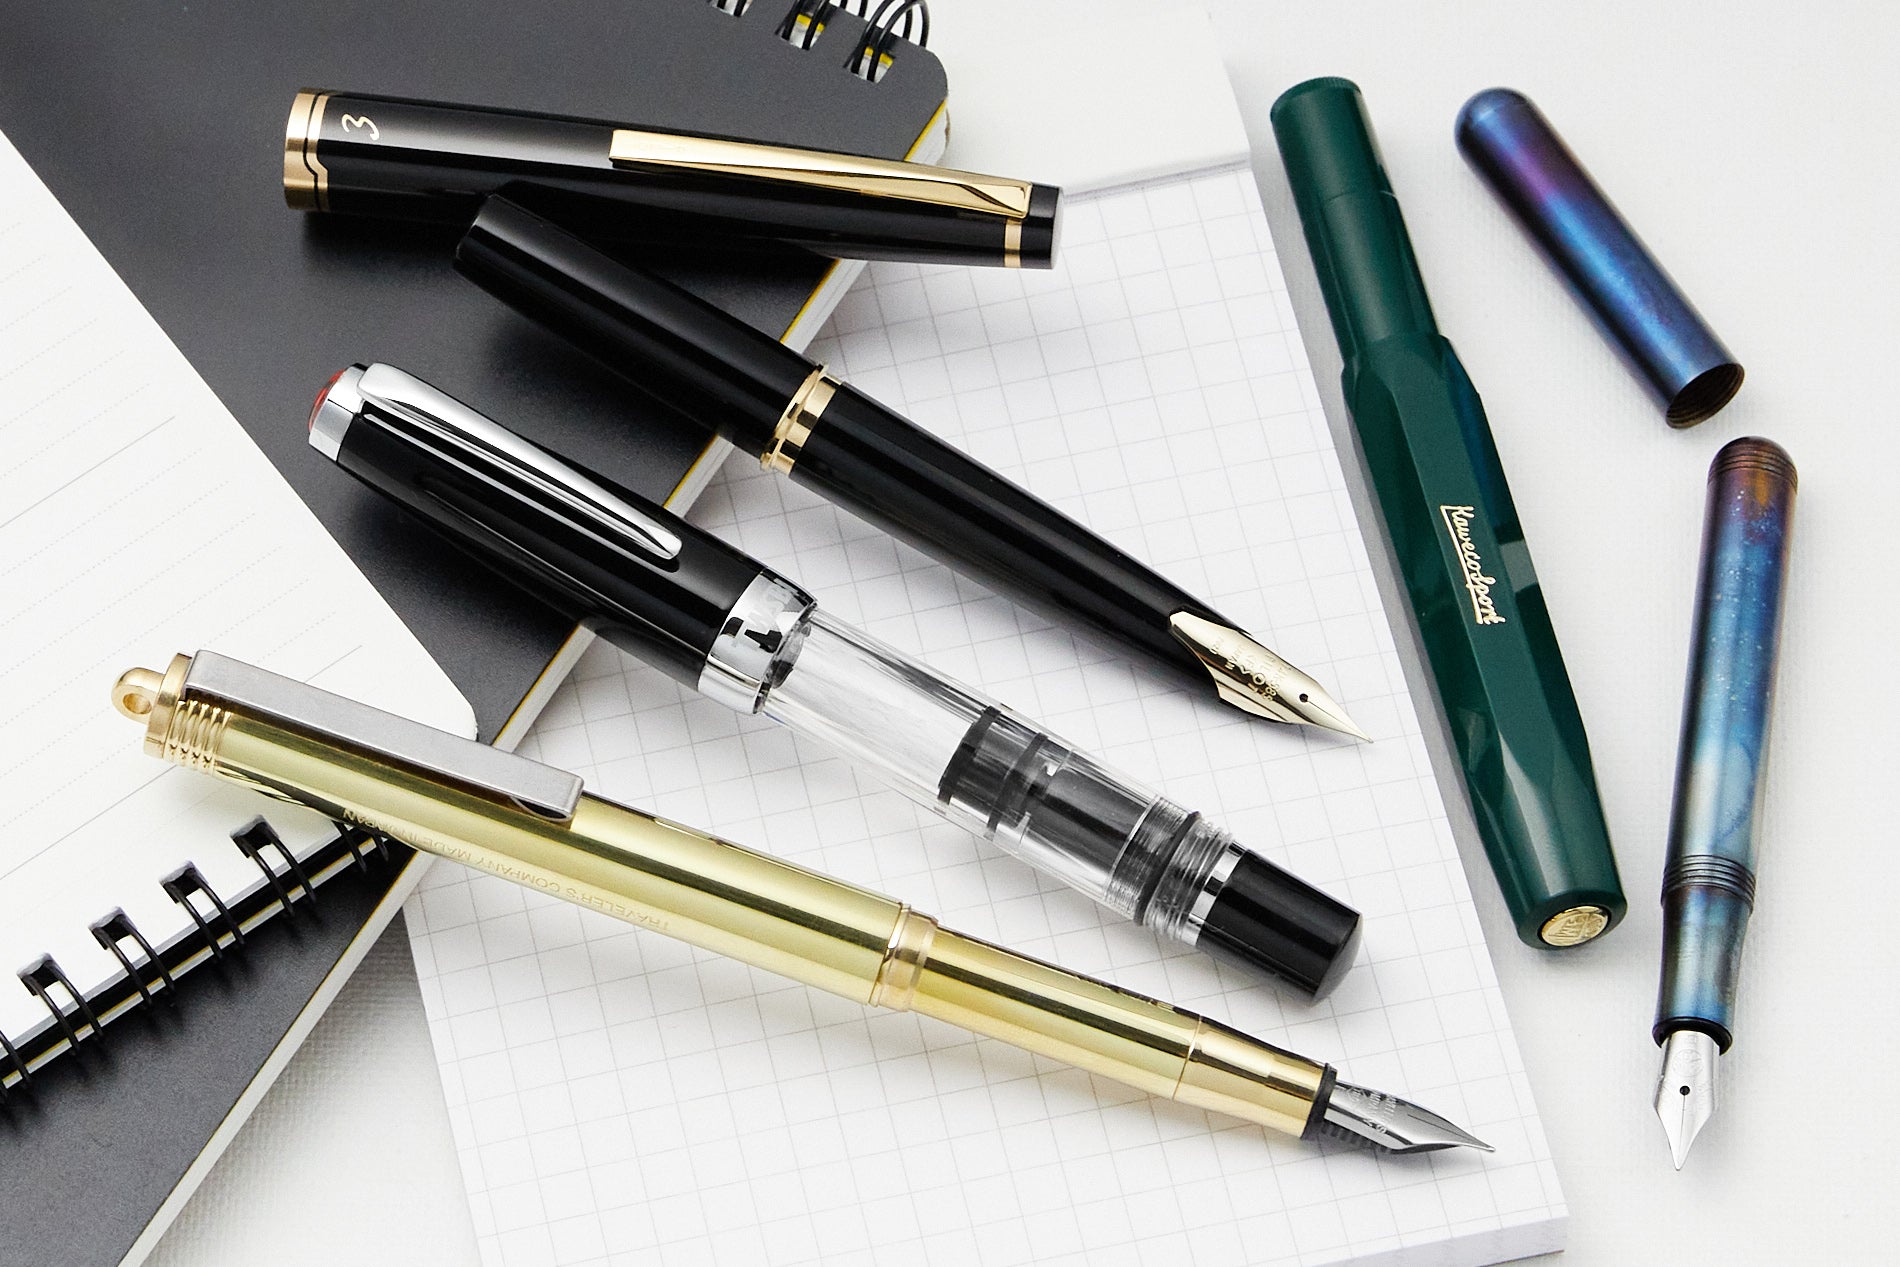 Compact-sized pocket fountain pens